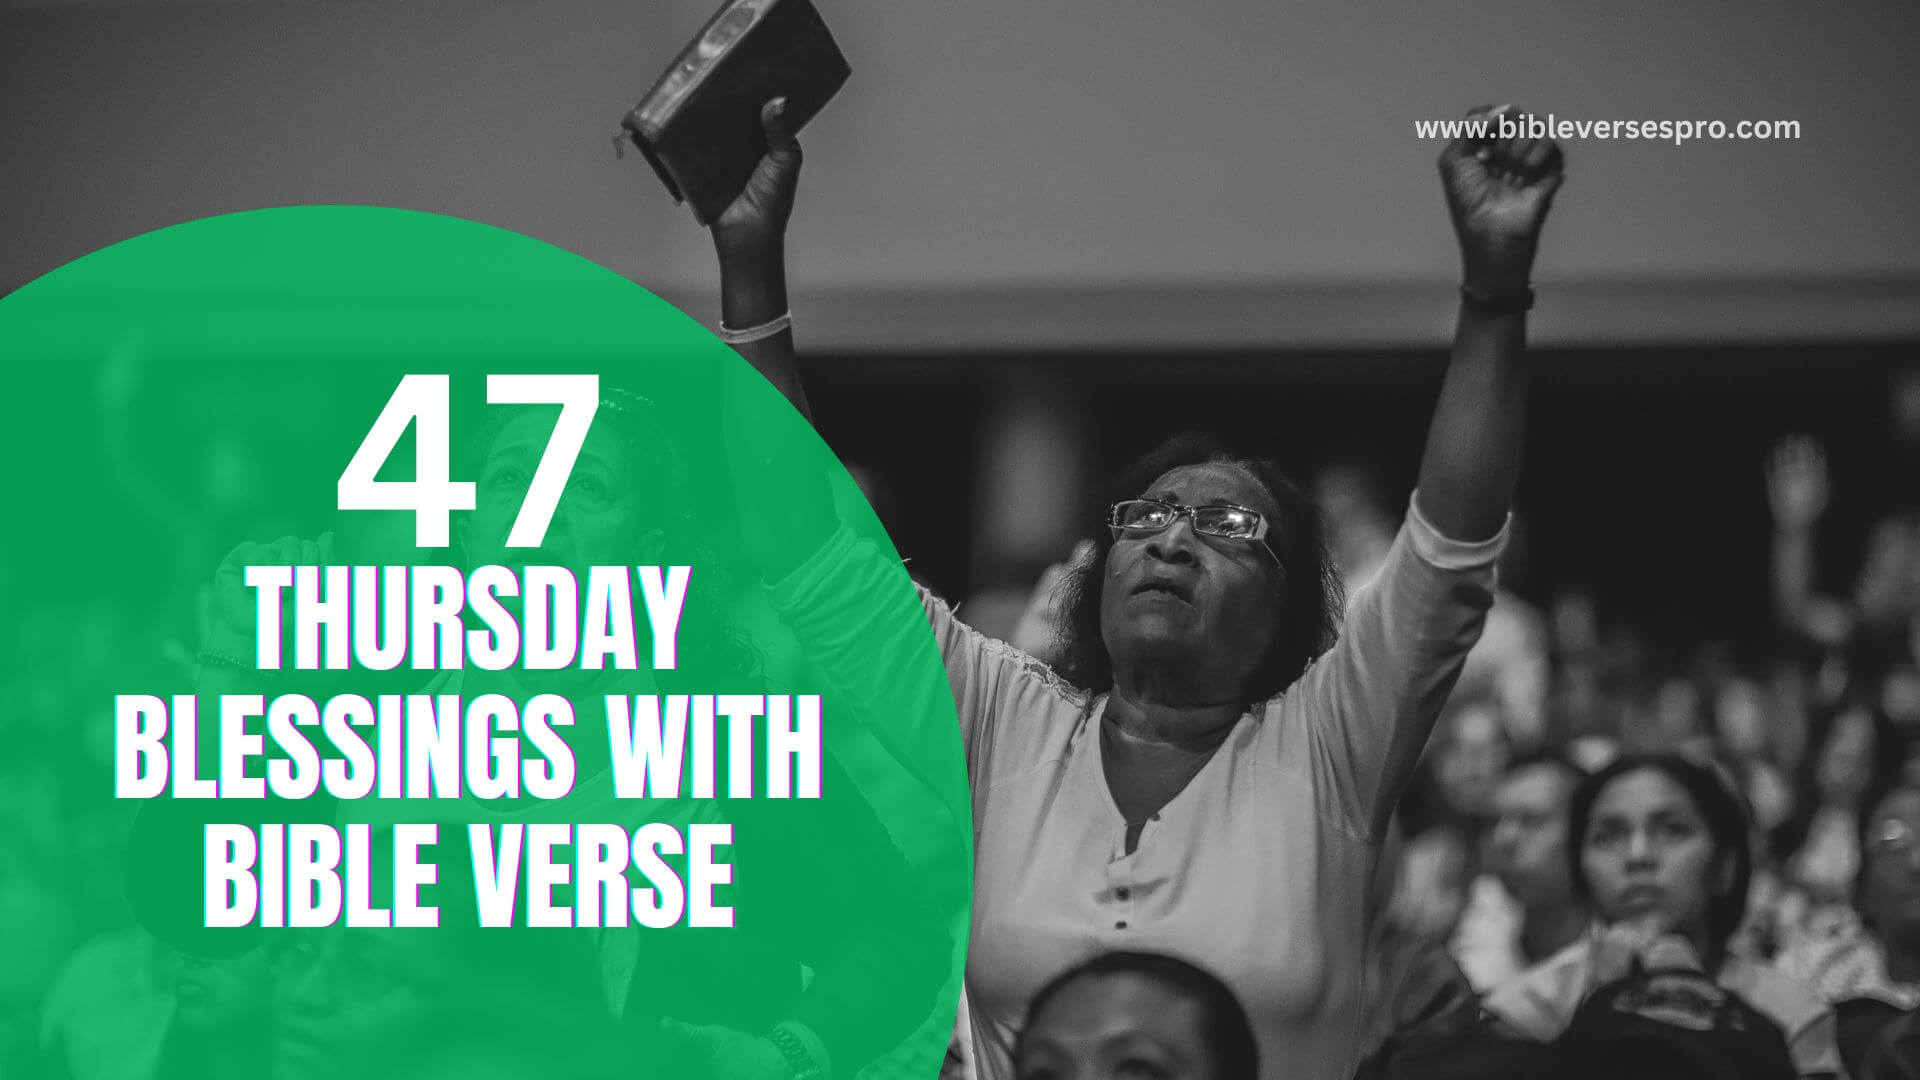 Thursday Blessings With Bible Verse